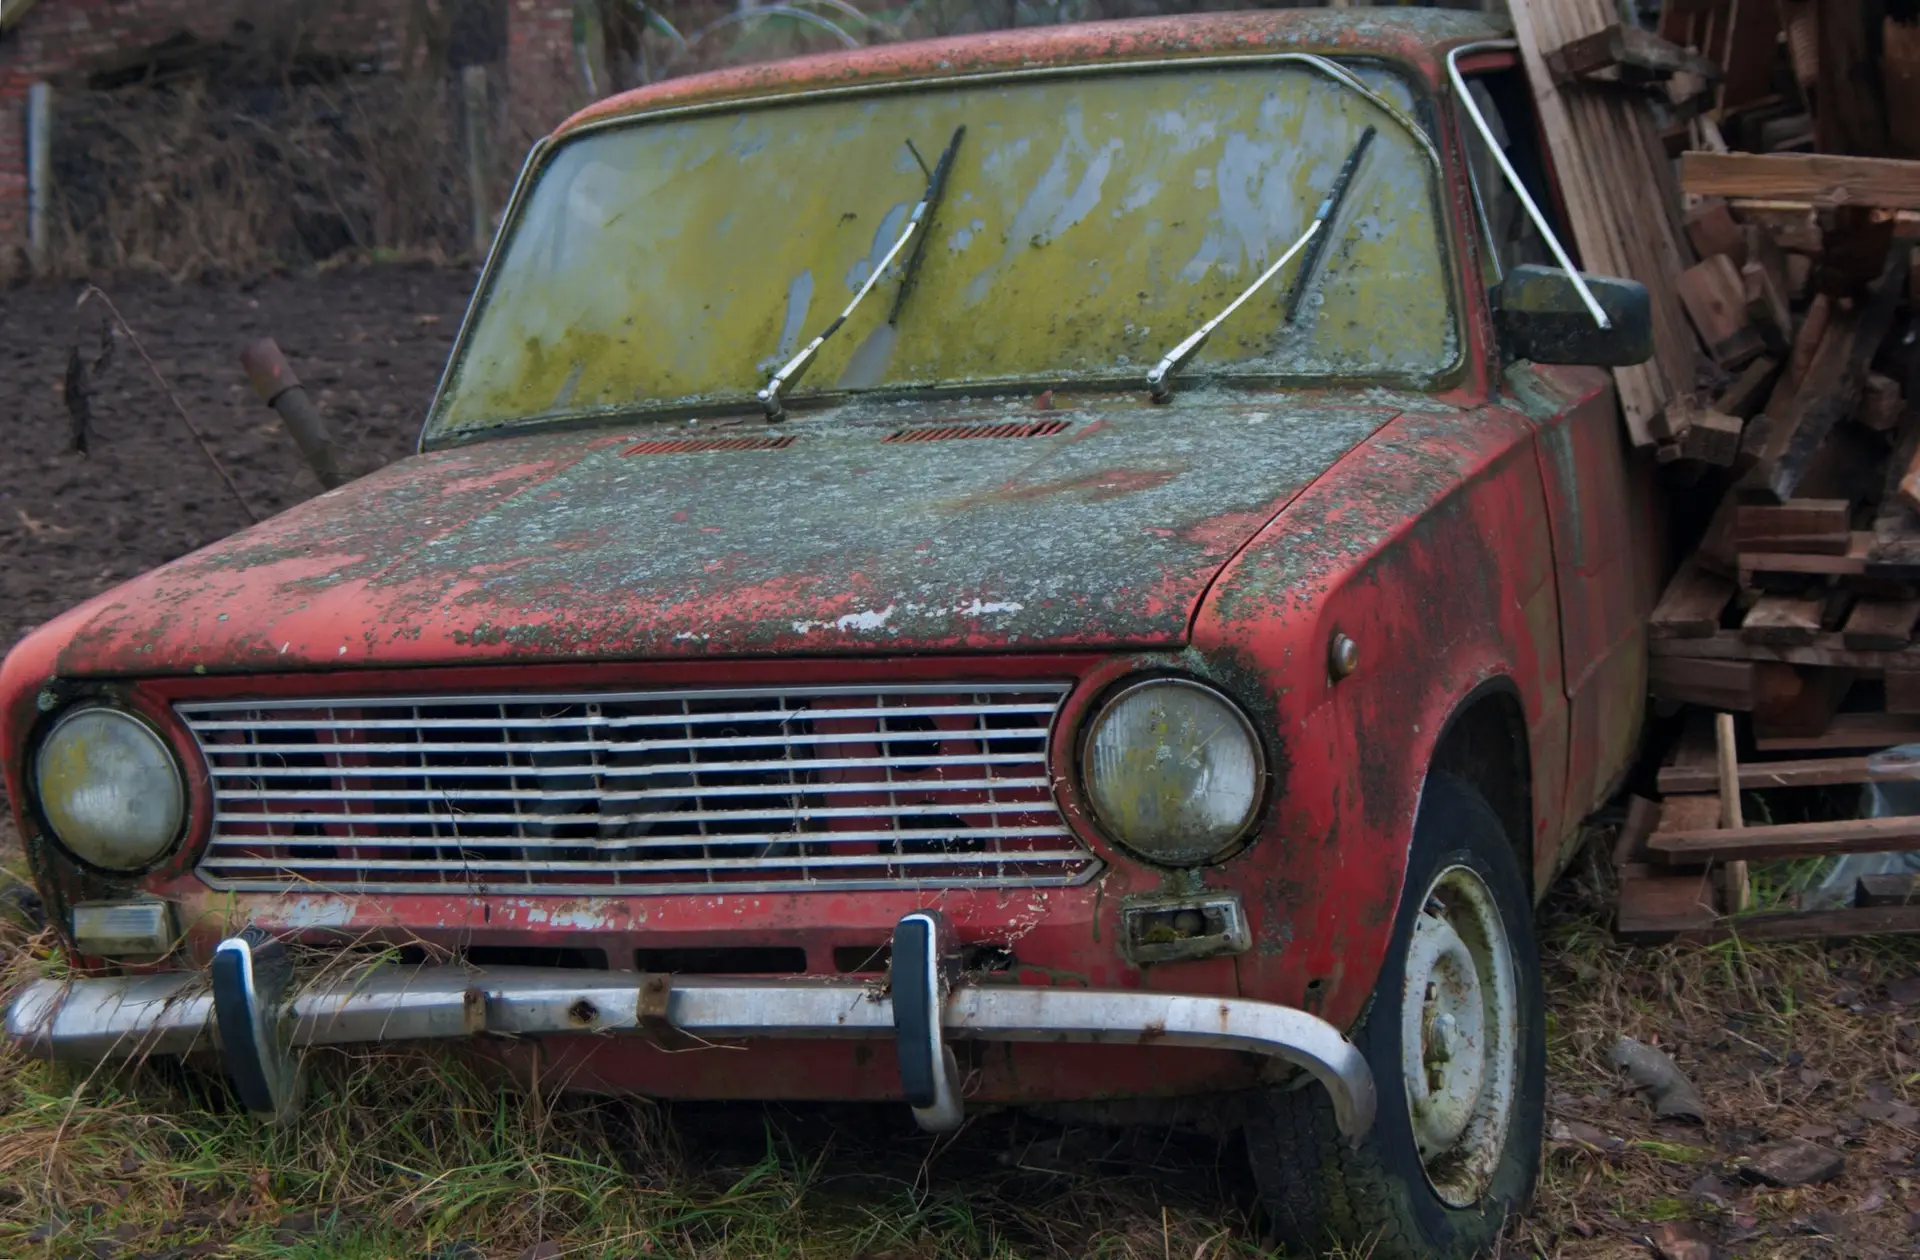 People Who Buy Junk Cars Without Title: Consequences and The Way Forward old rusty car